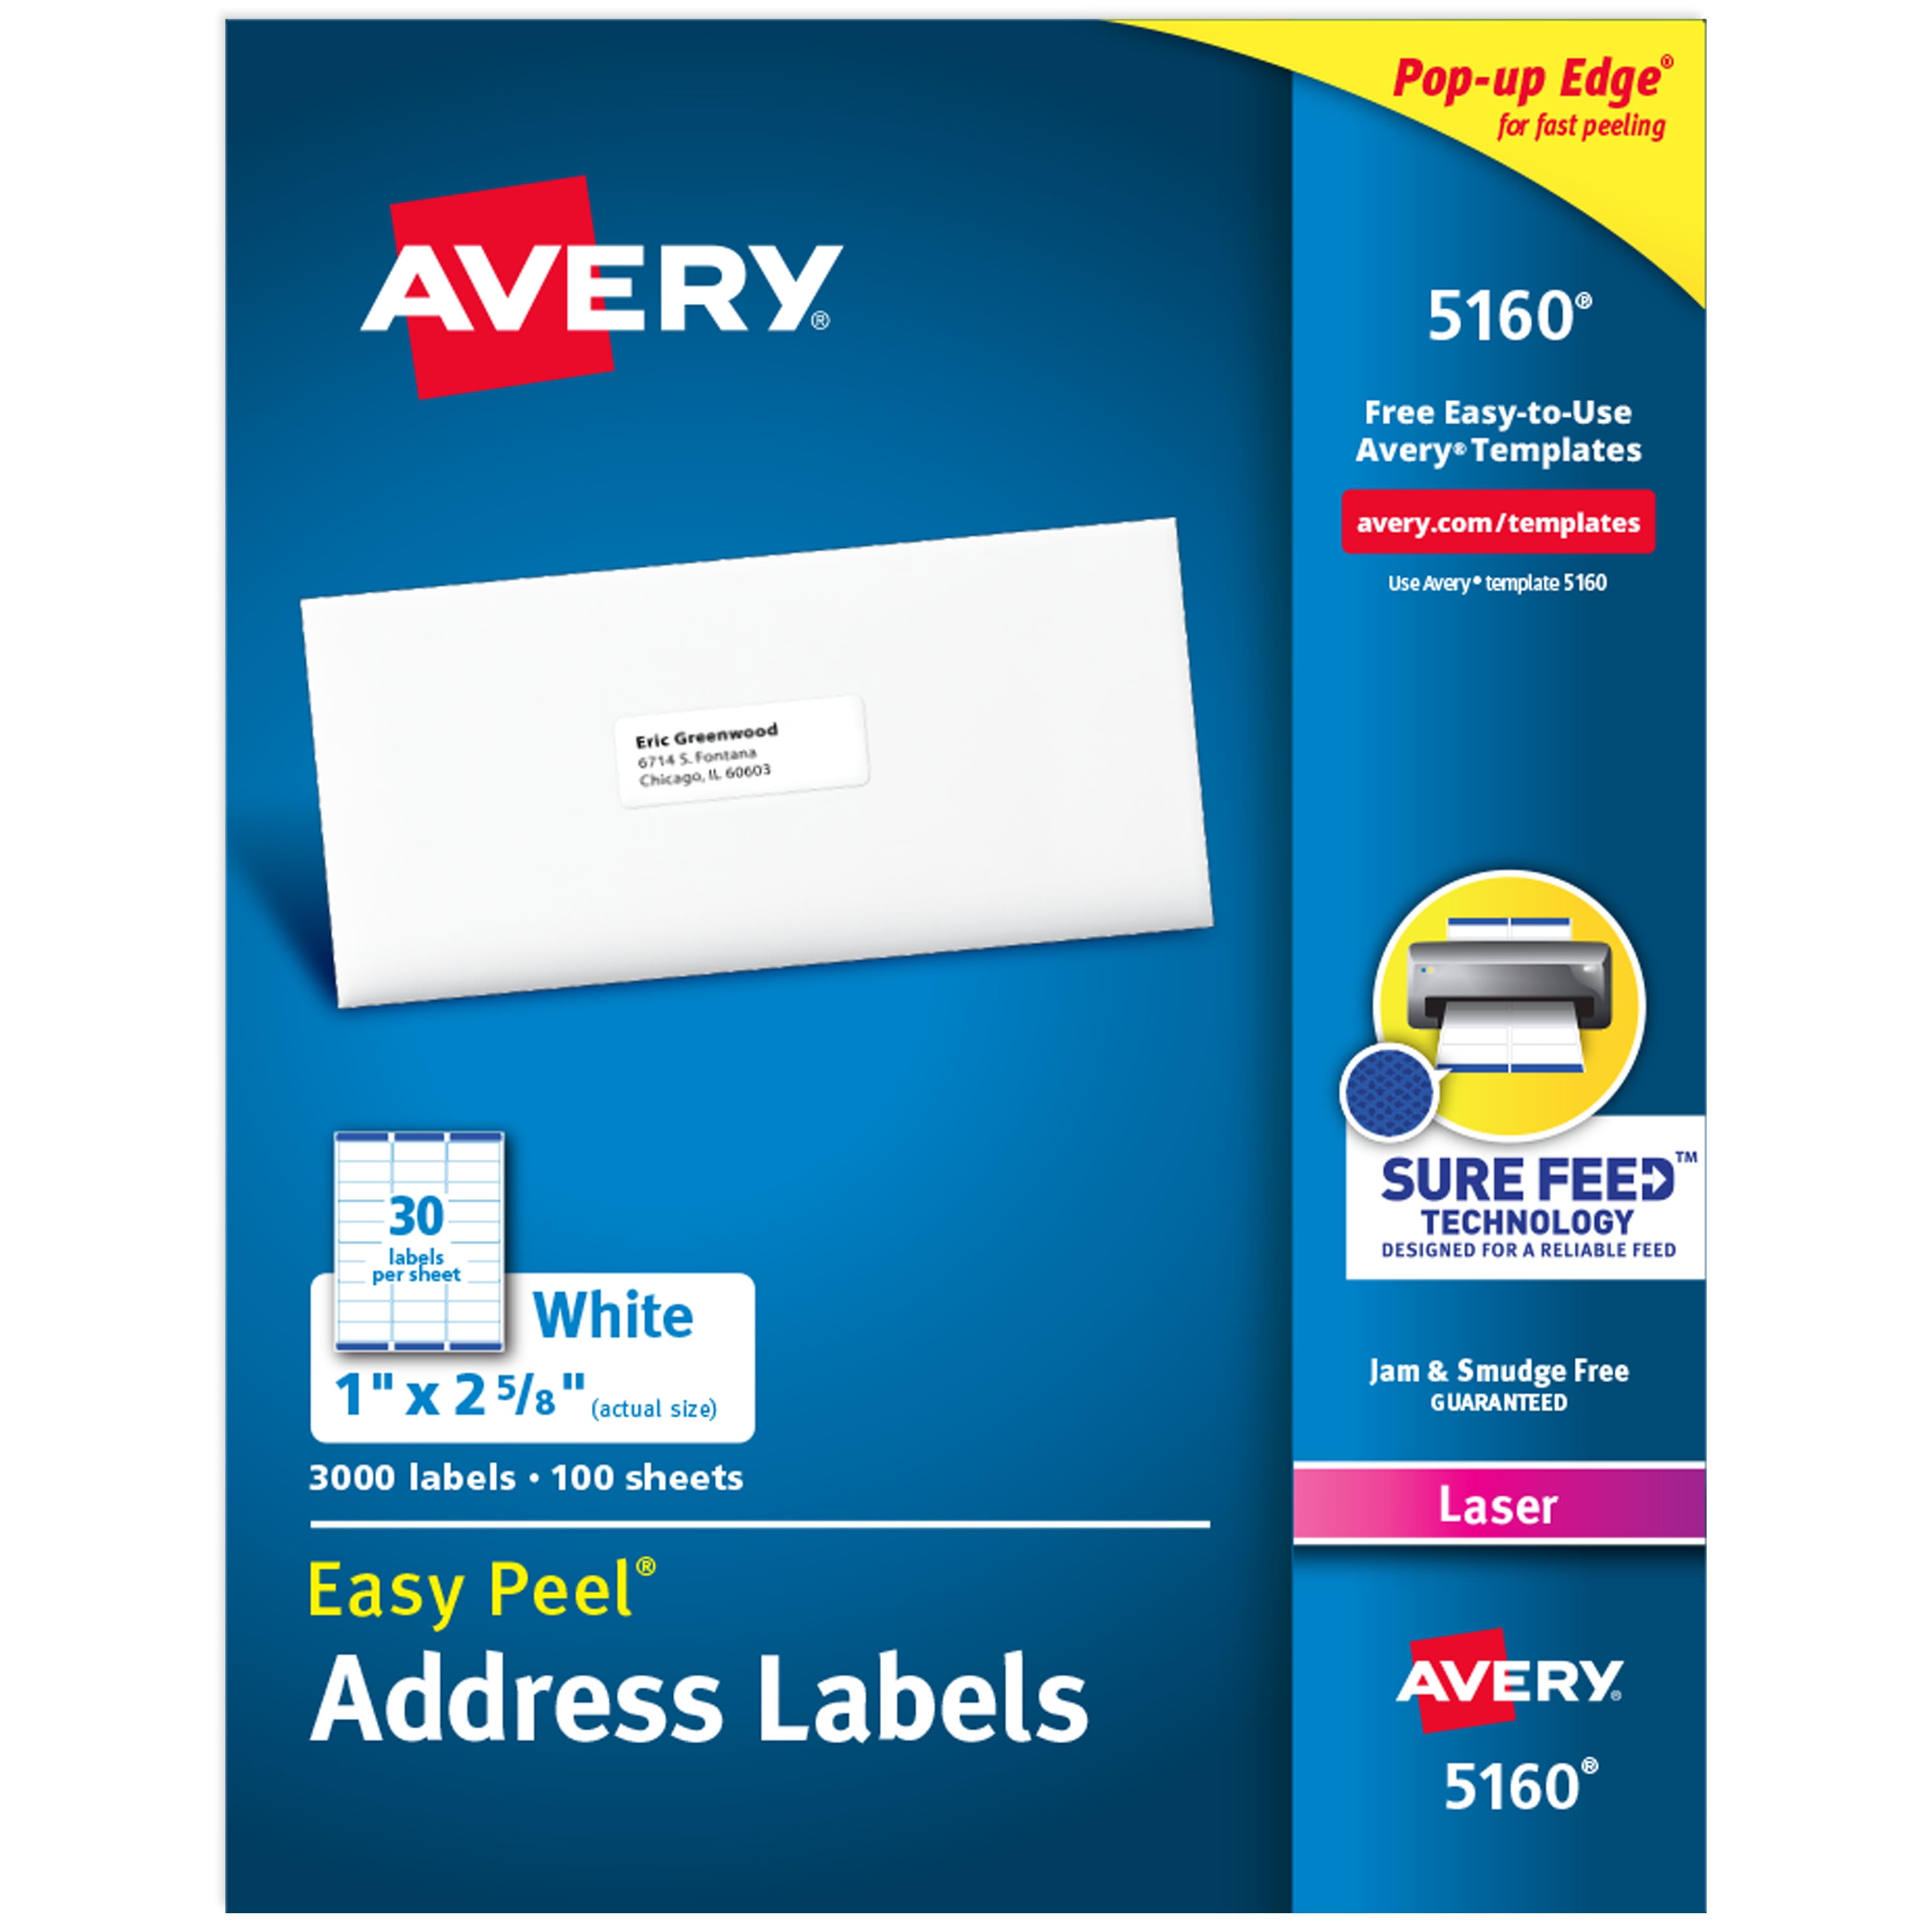 Avery Removable Multi-Use Labels Pack of 20 Blue Border 3.5 x 1.25 Inches 41446